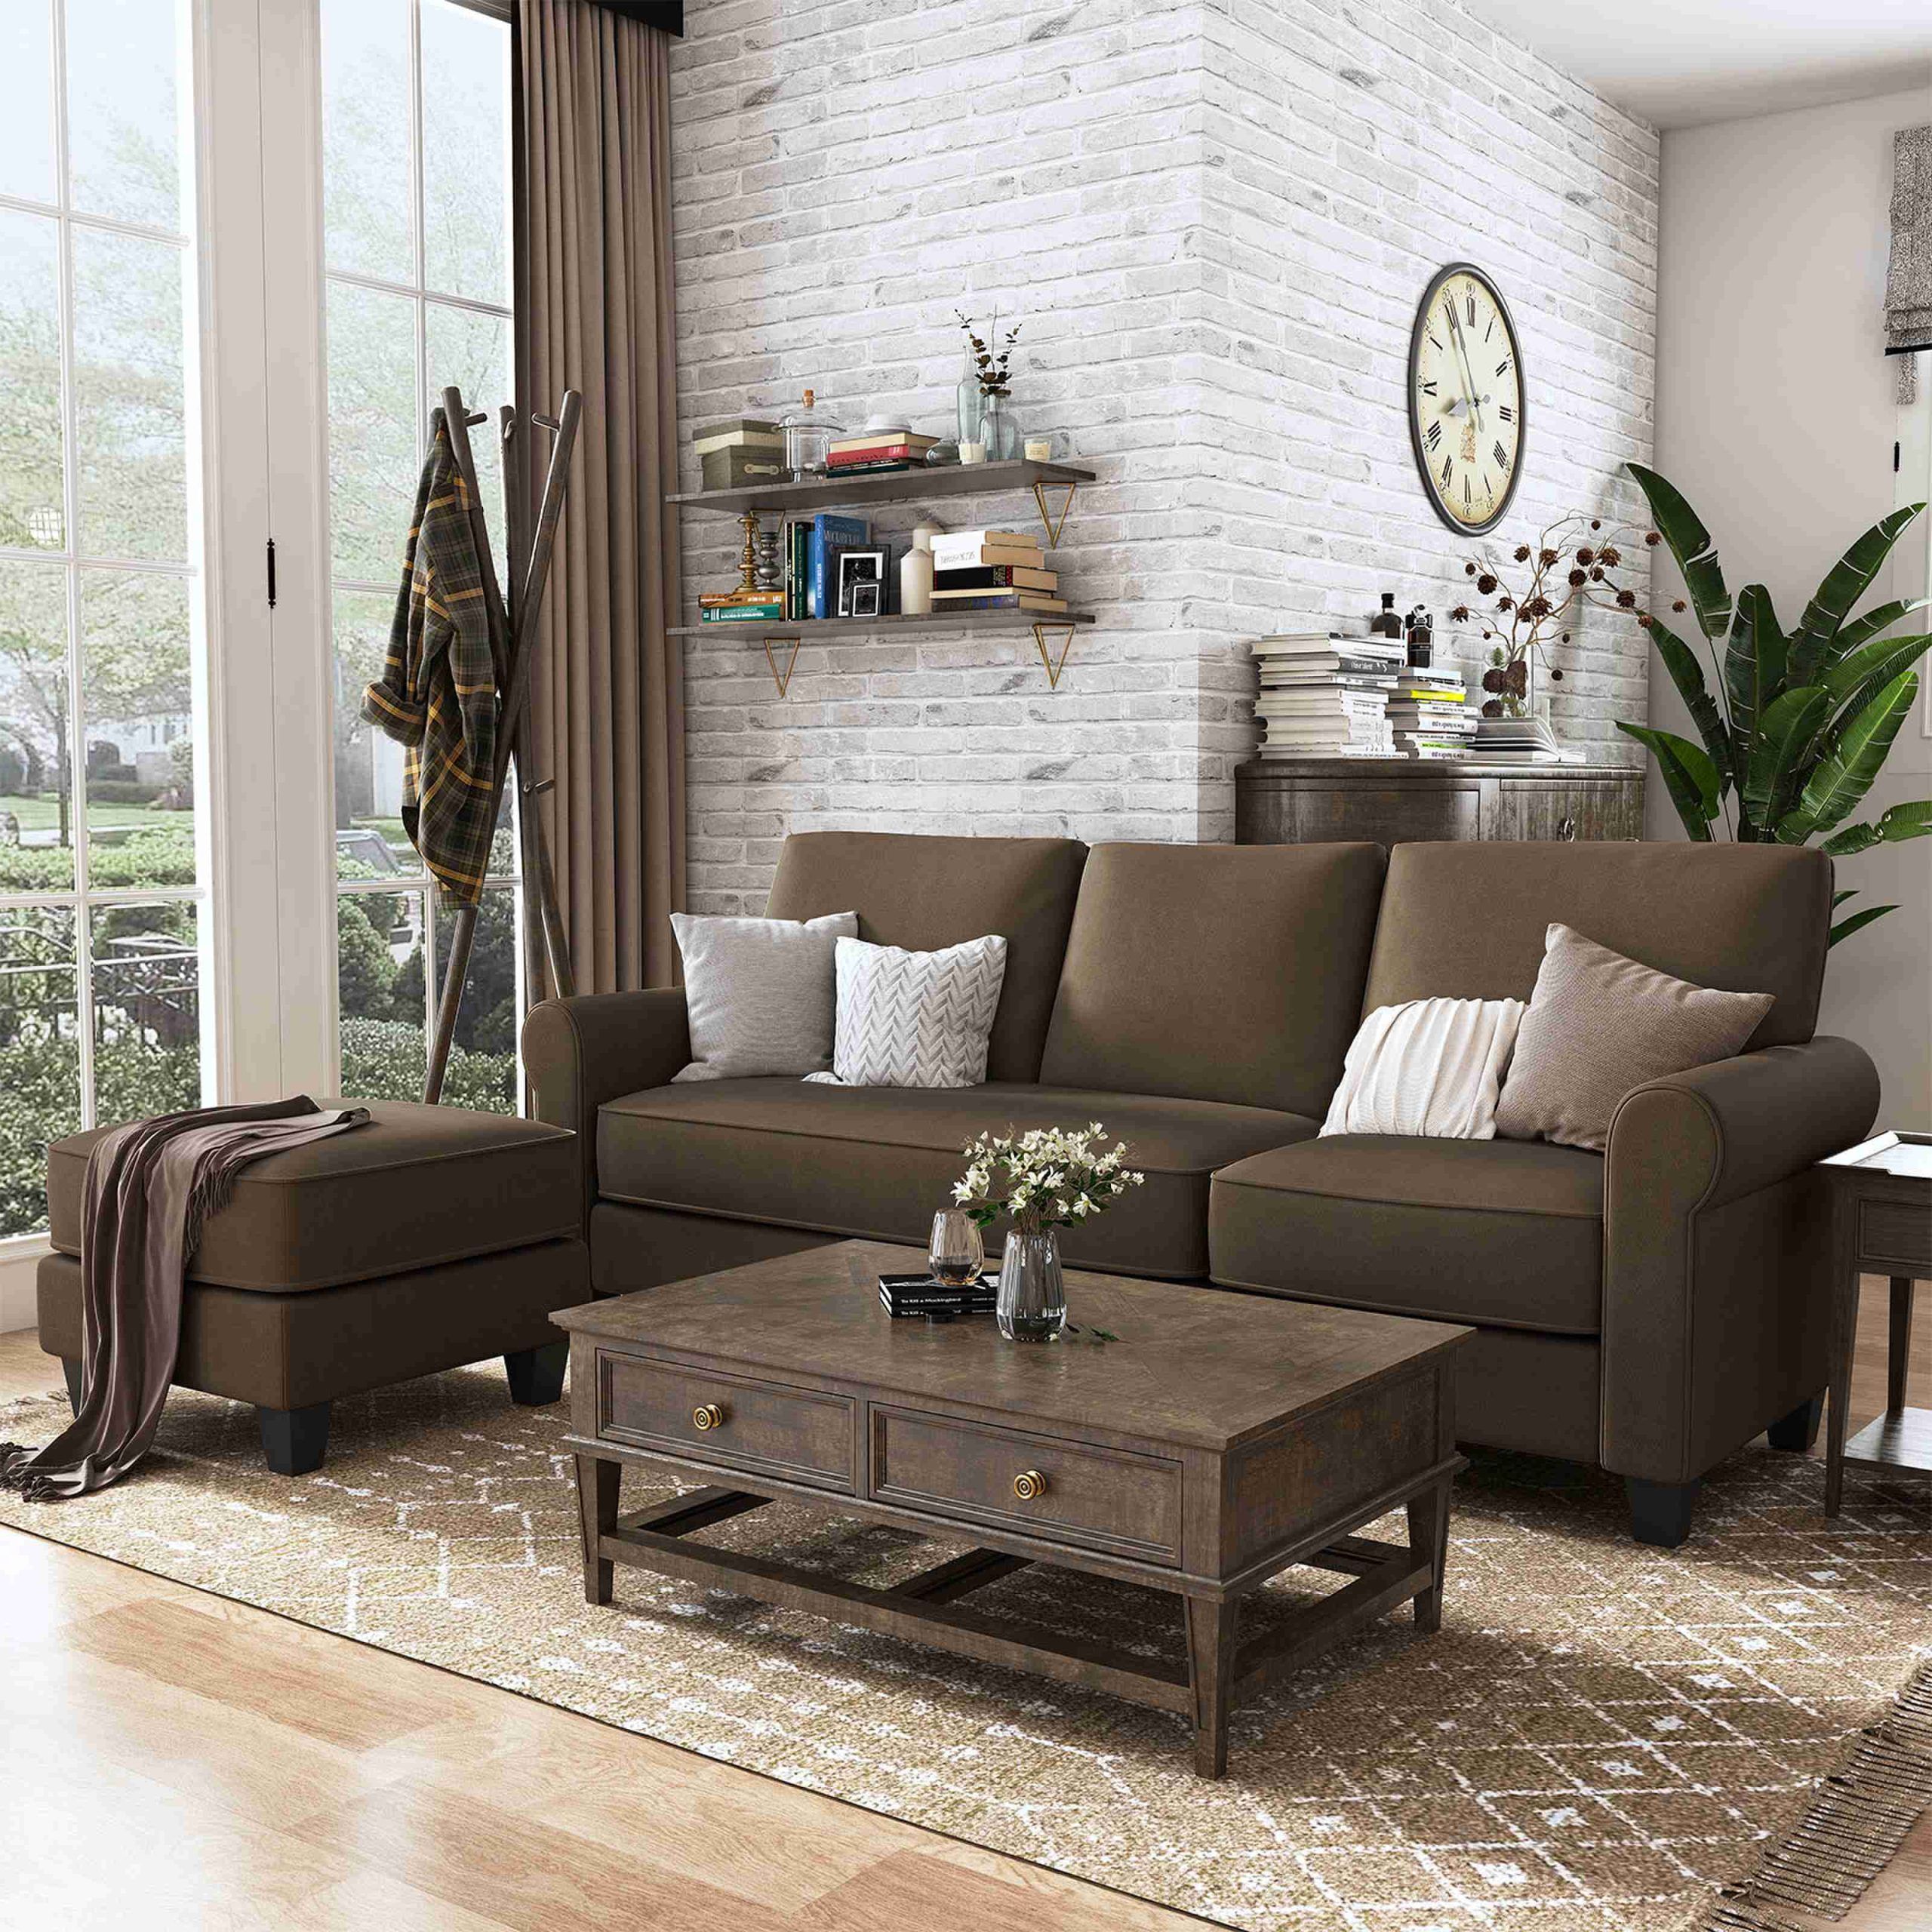 Nolany Convertible Sectional Sofa L Shaped Couch 3 Seat Sofa With Chaise, Chocolate  Brown – Walmart Inside Sofas In Chocolate Brown (View 3 of 15)